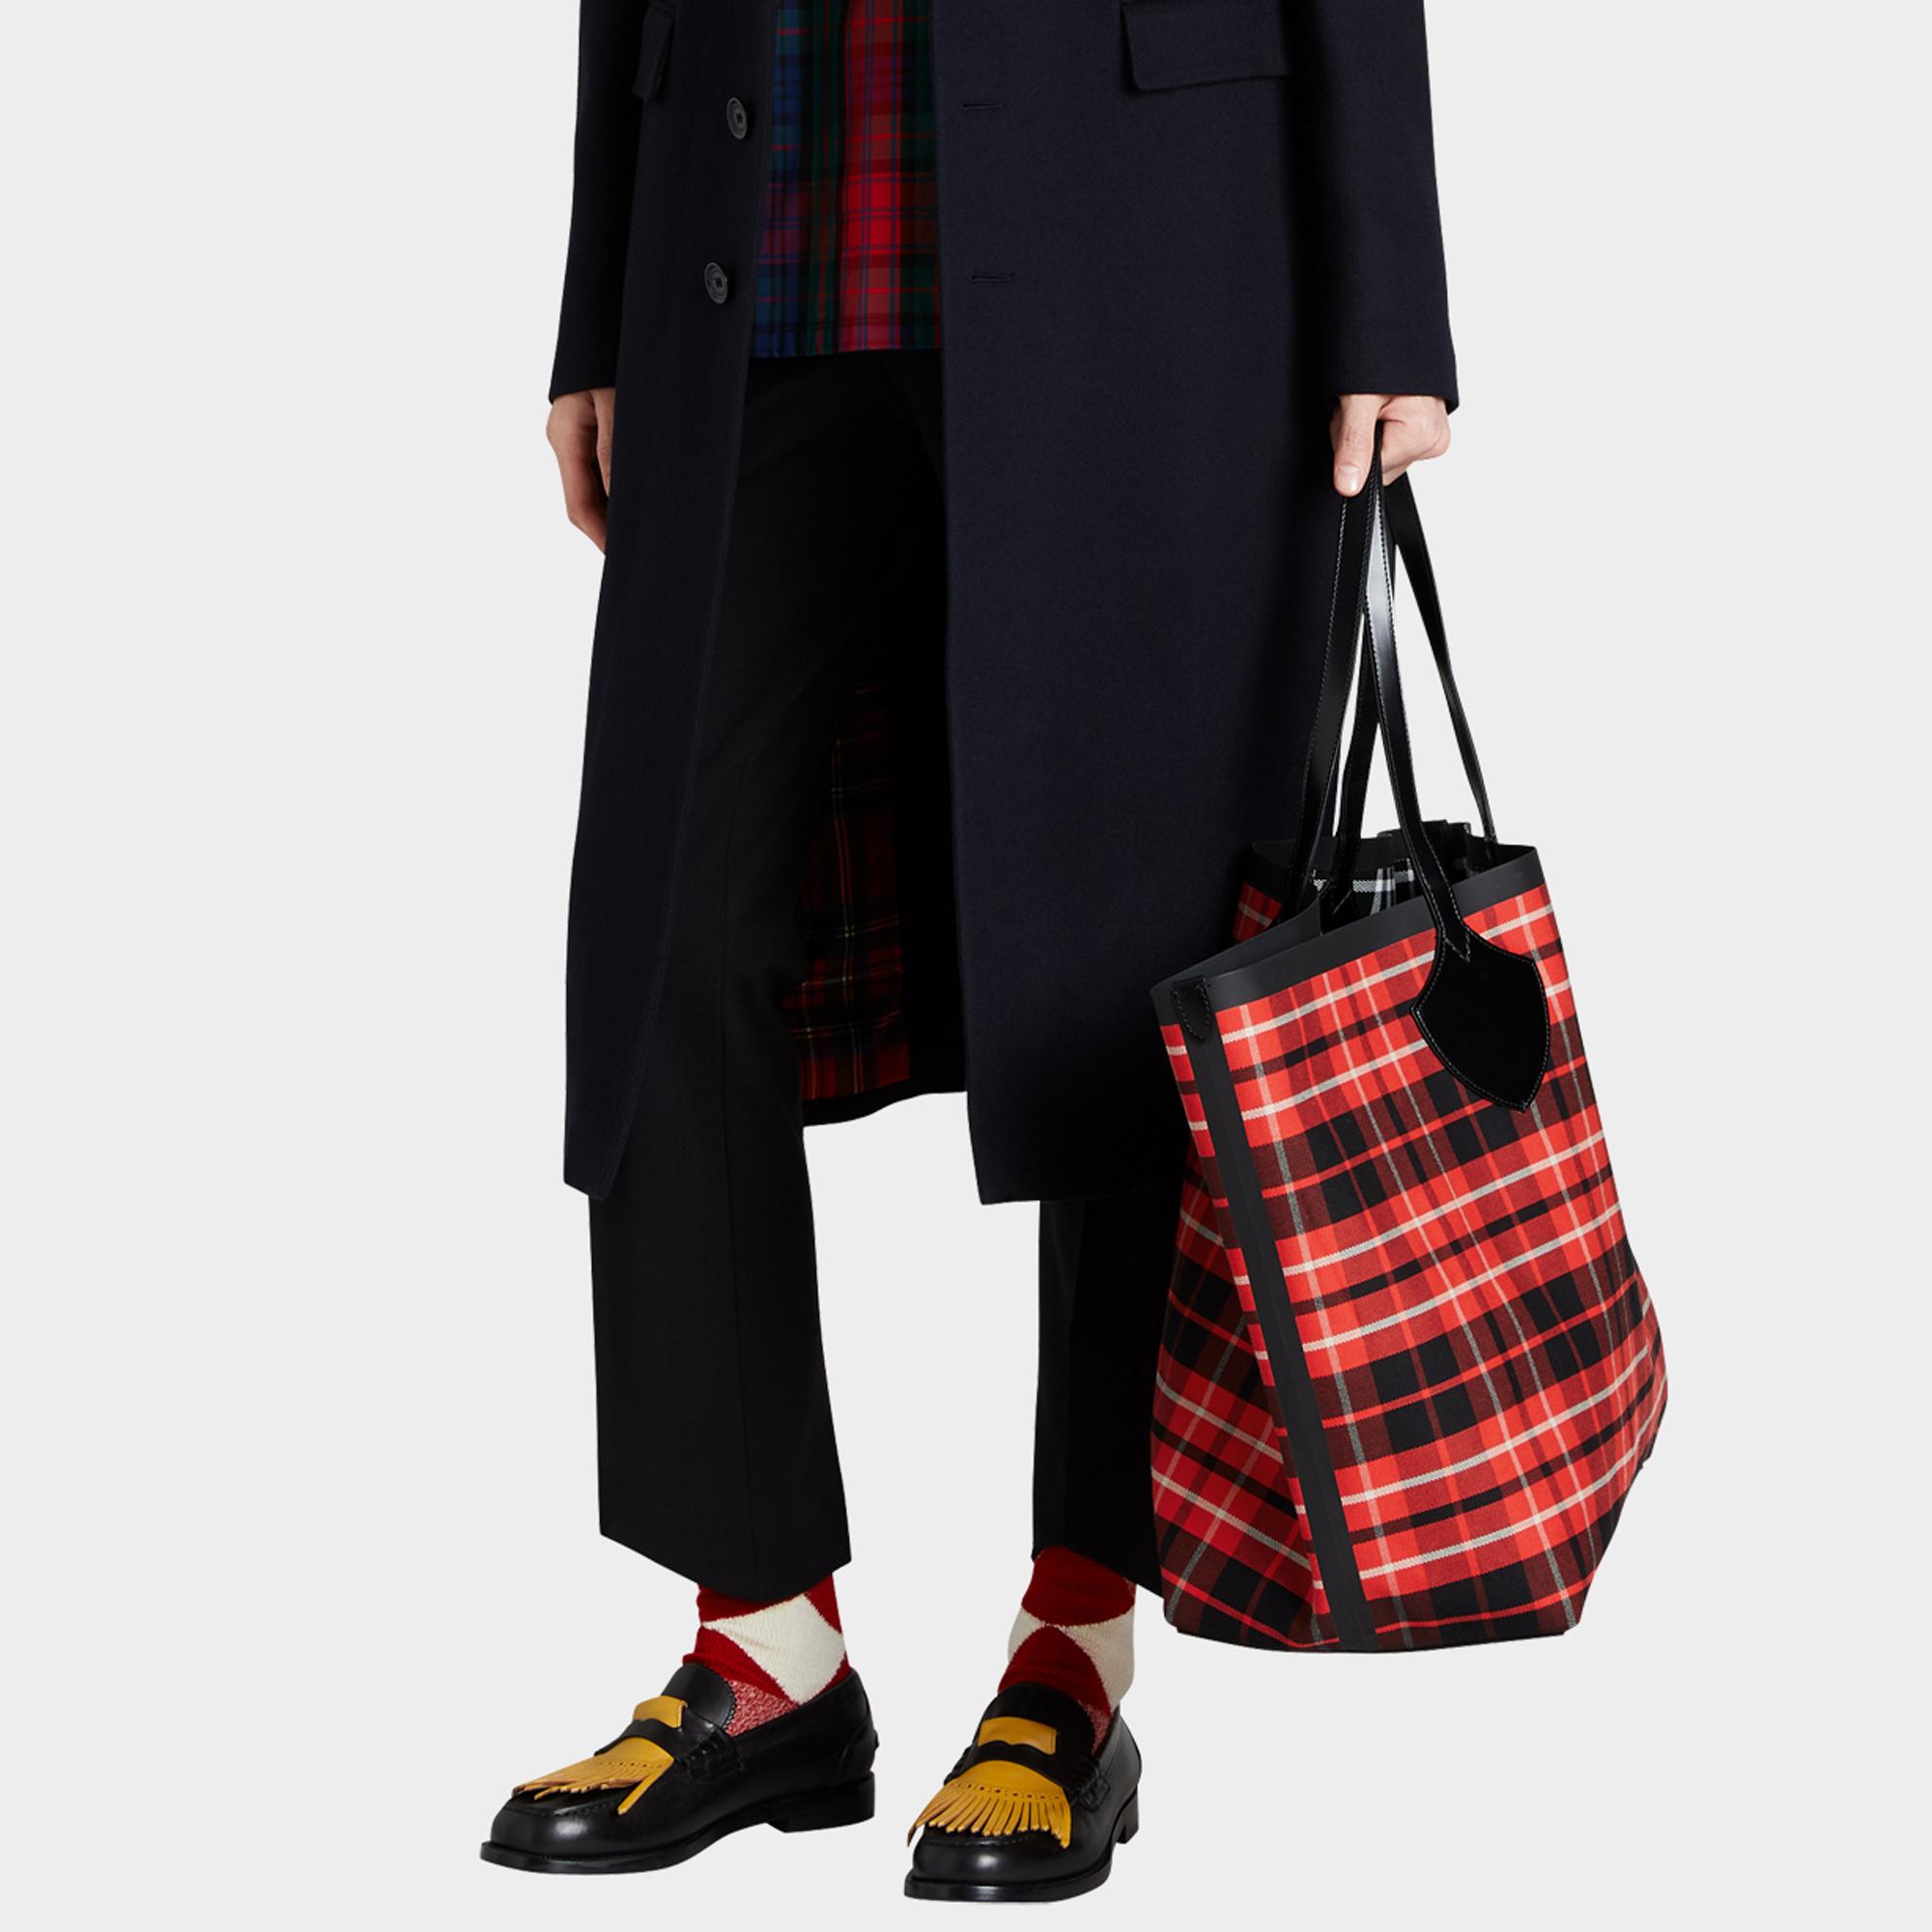 Burberry The Giant Reversible Tote Bag In Vibrant Red And Black Tartan Bonded - Lyst